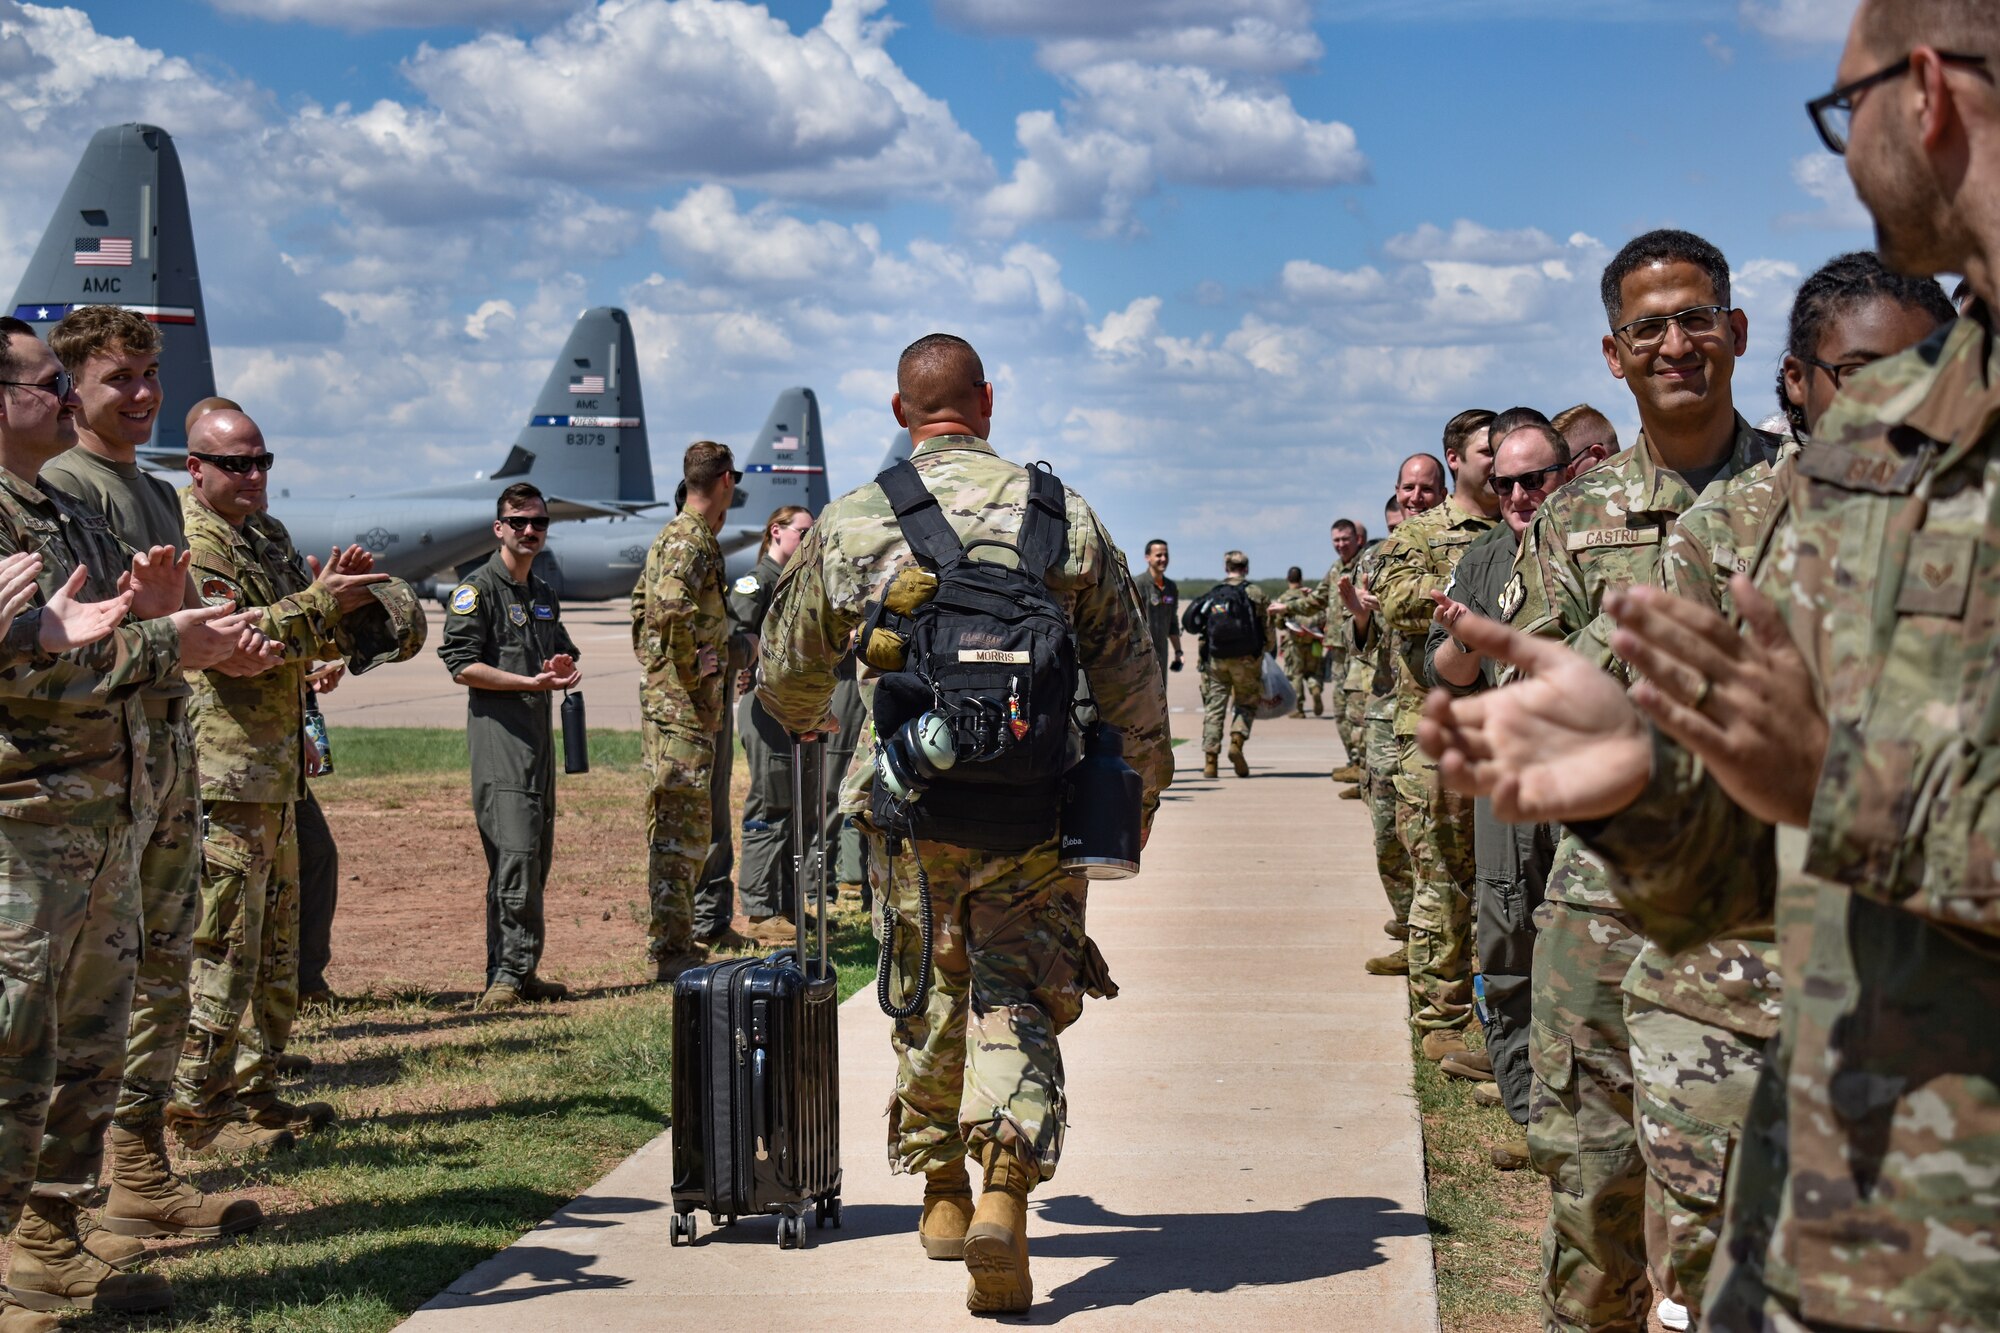 Members from the 317th Airlift Wing cheer on the 39th Airlift Squadron deployers as they process out to the Dyess flightline, Aug. 25, 2022. The C-130 unit’s deployment to U.S. Central Command taskings marks the first implementation of the Air Force Generation model in Air Mobility Command. The Air Force Force Generation model initially conceived by former Air Force Chief of Staff, Gen. David L. Goldfein, replacing the current Air Expeditionary Force construct to balance today’s combatant commander needs while building high-end readiness for the future. (U.S. Air Force photo by 1st Lt. Kaitlin Cashin)